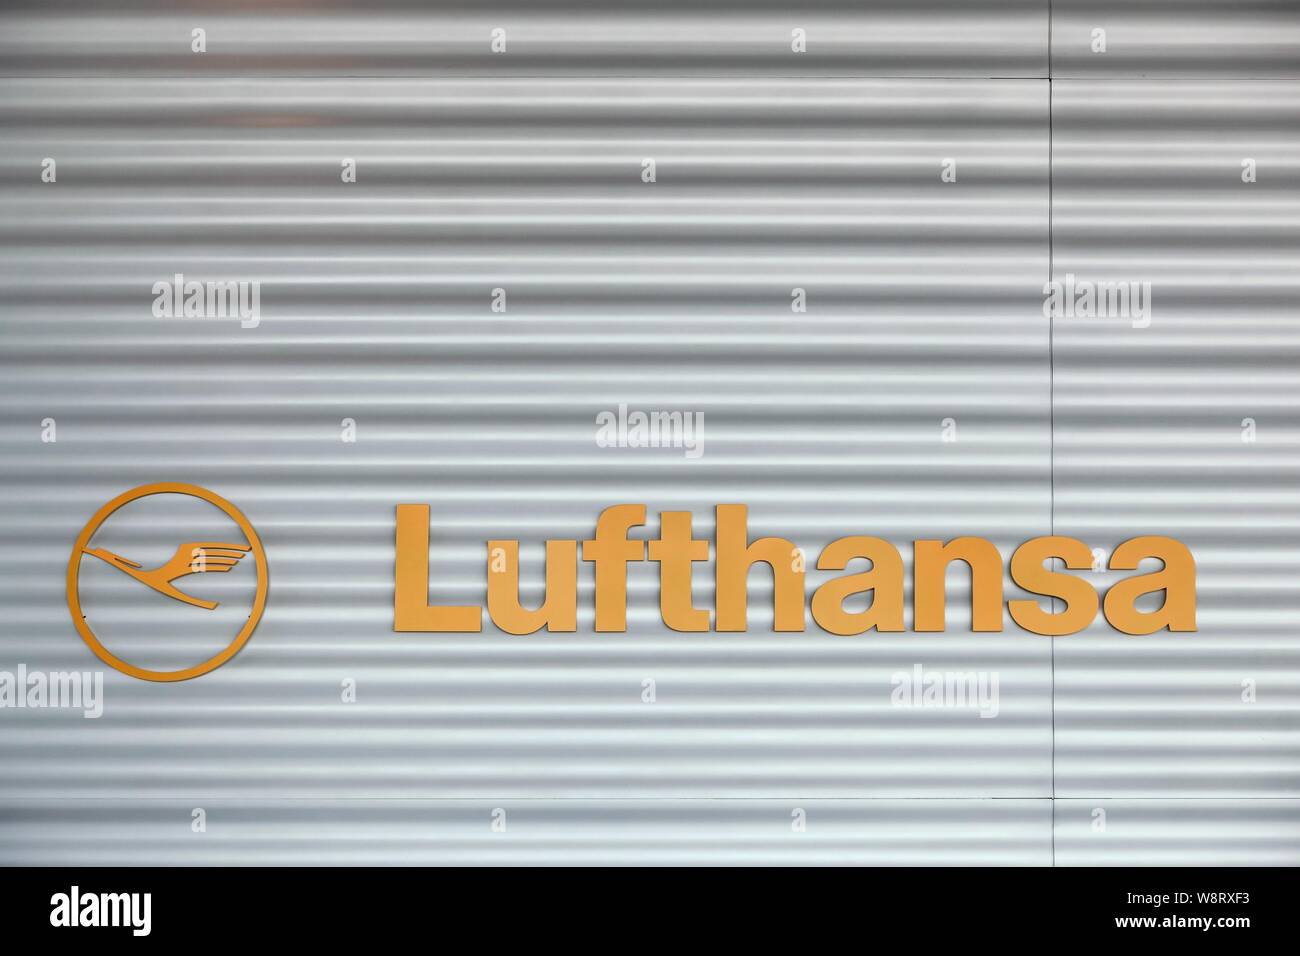 Frankfurt, Germany - September 28, 2015: Lufthansa logo on wall .Lufthansa is a german airline and also the largest airline in Europe Stock Photo